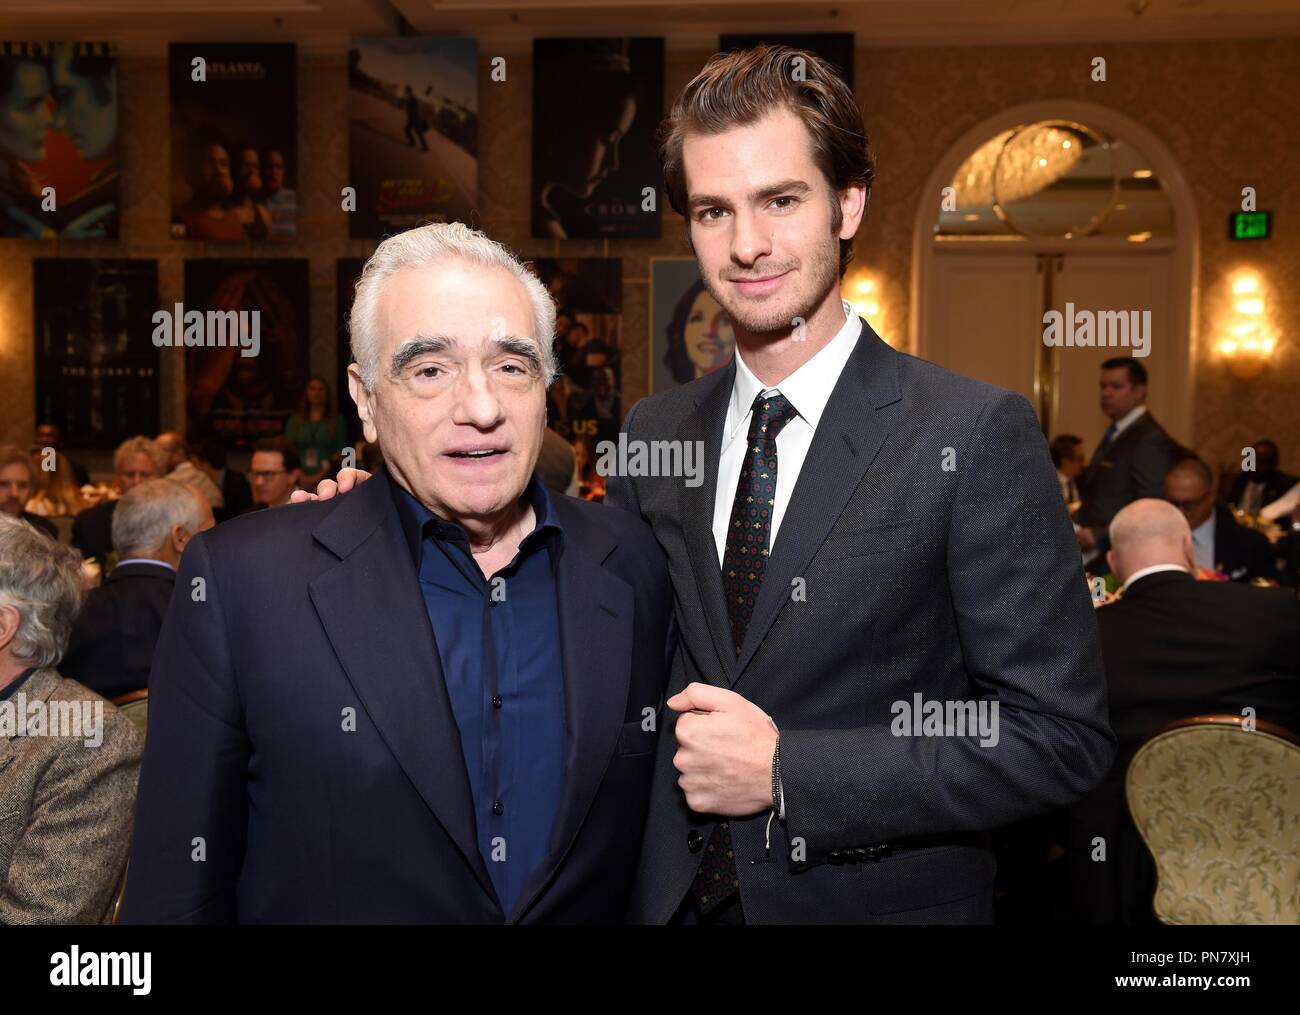 LOS ANGELES, CA - JANUARY 06:  Director Martin Scorsese (L) and actor Andrew Garfield attend the 17th annual AFI Awards at Four Seasons Los Angeles at Beverly Hills on January 6, 2017 in Los Angeles, California. Photo: AFI Stock Photo